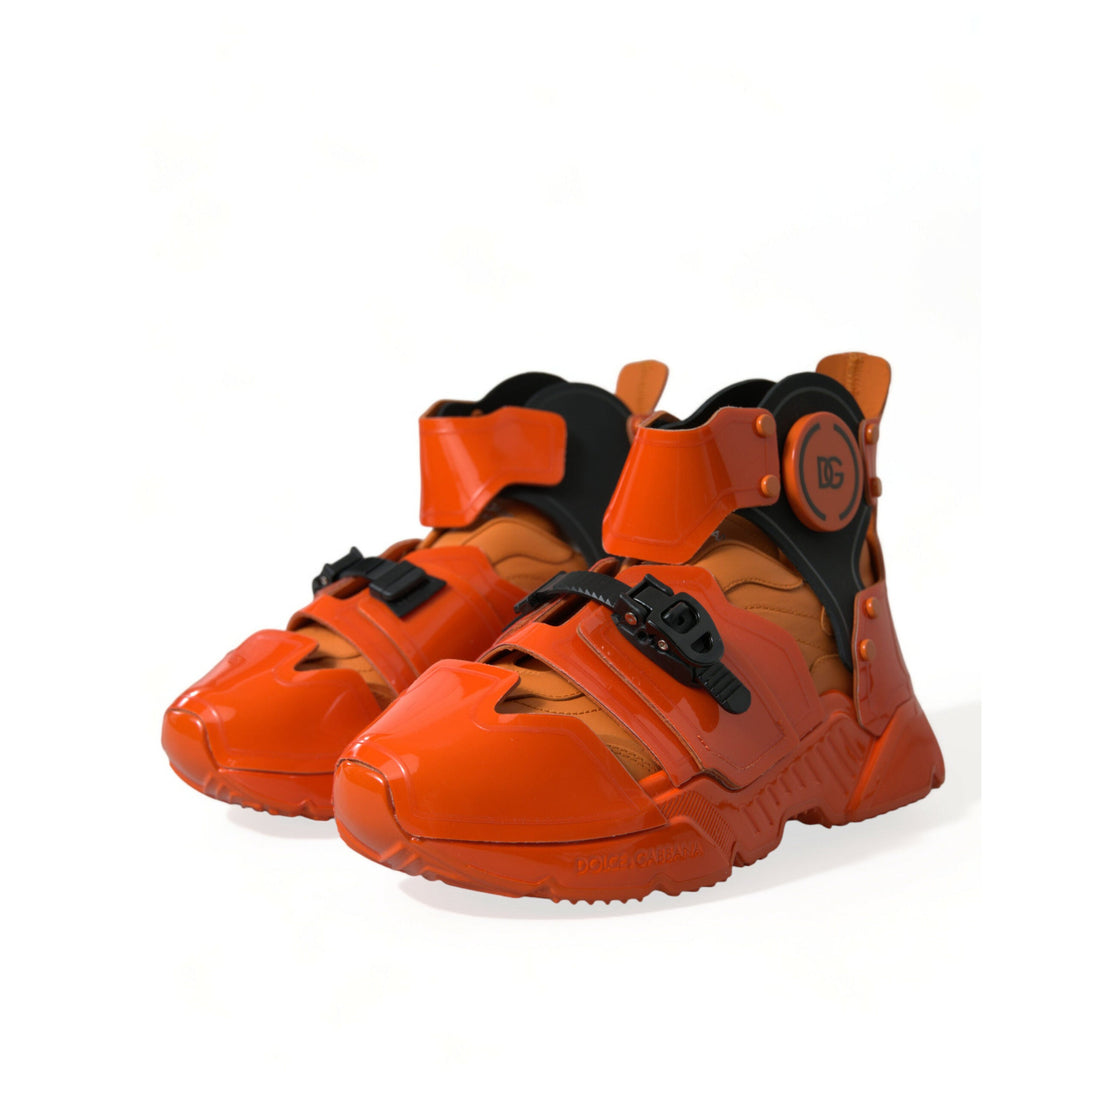 Dolce & Gabbana Orange Multi Panel Chunky High Top Sneakers Shoes